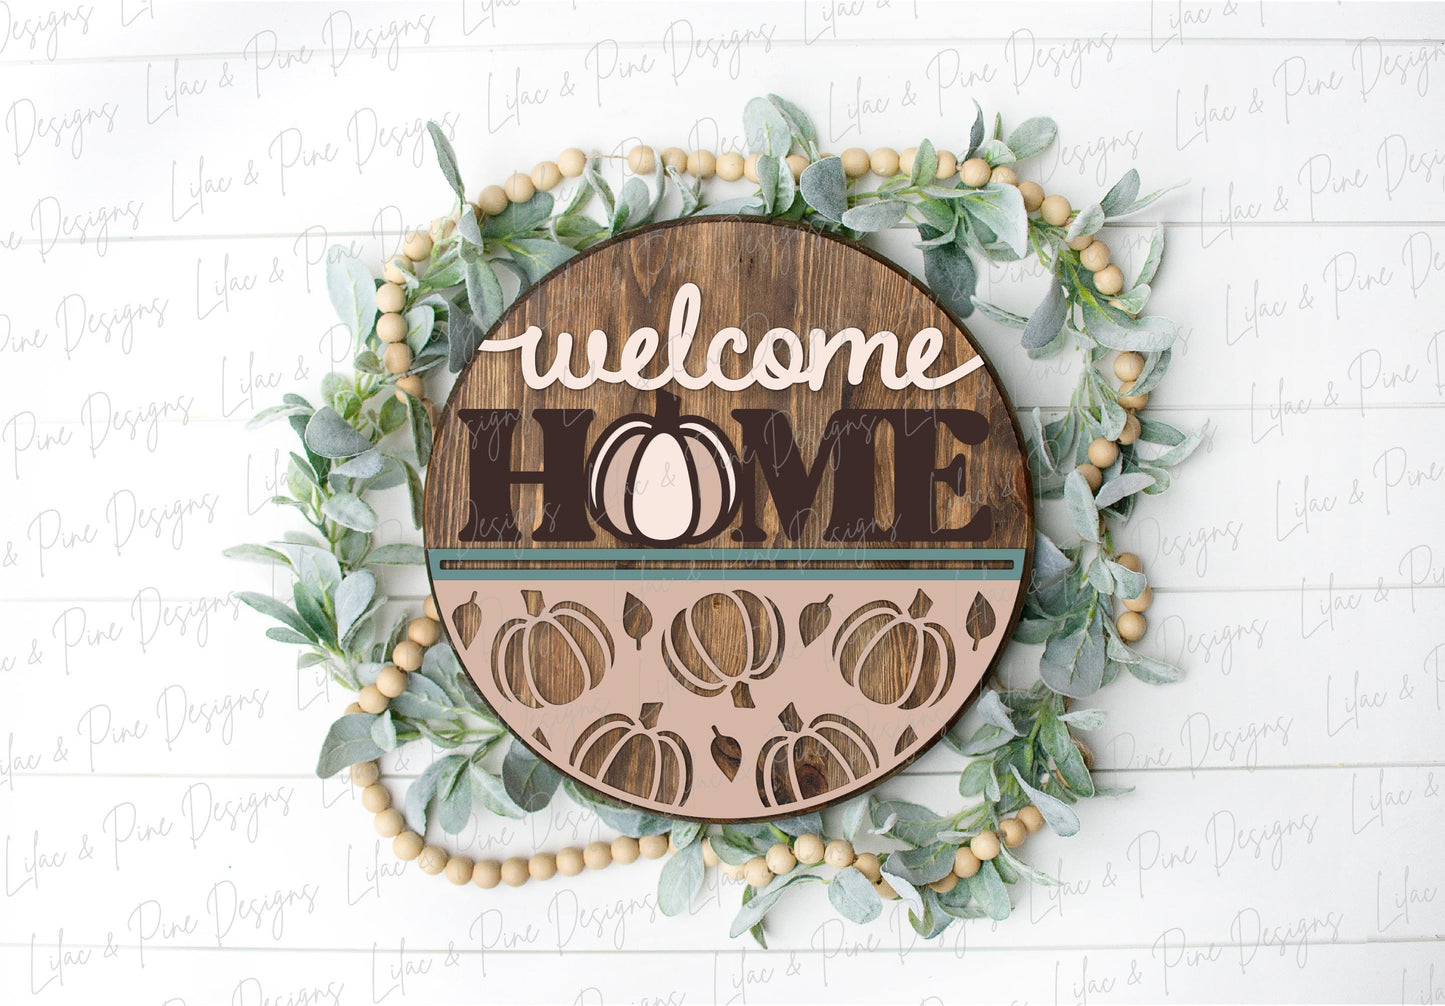 welcome home pumpkin SVG for lasers